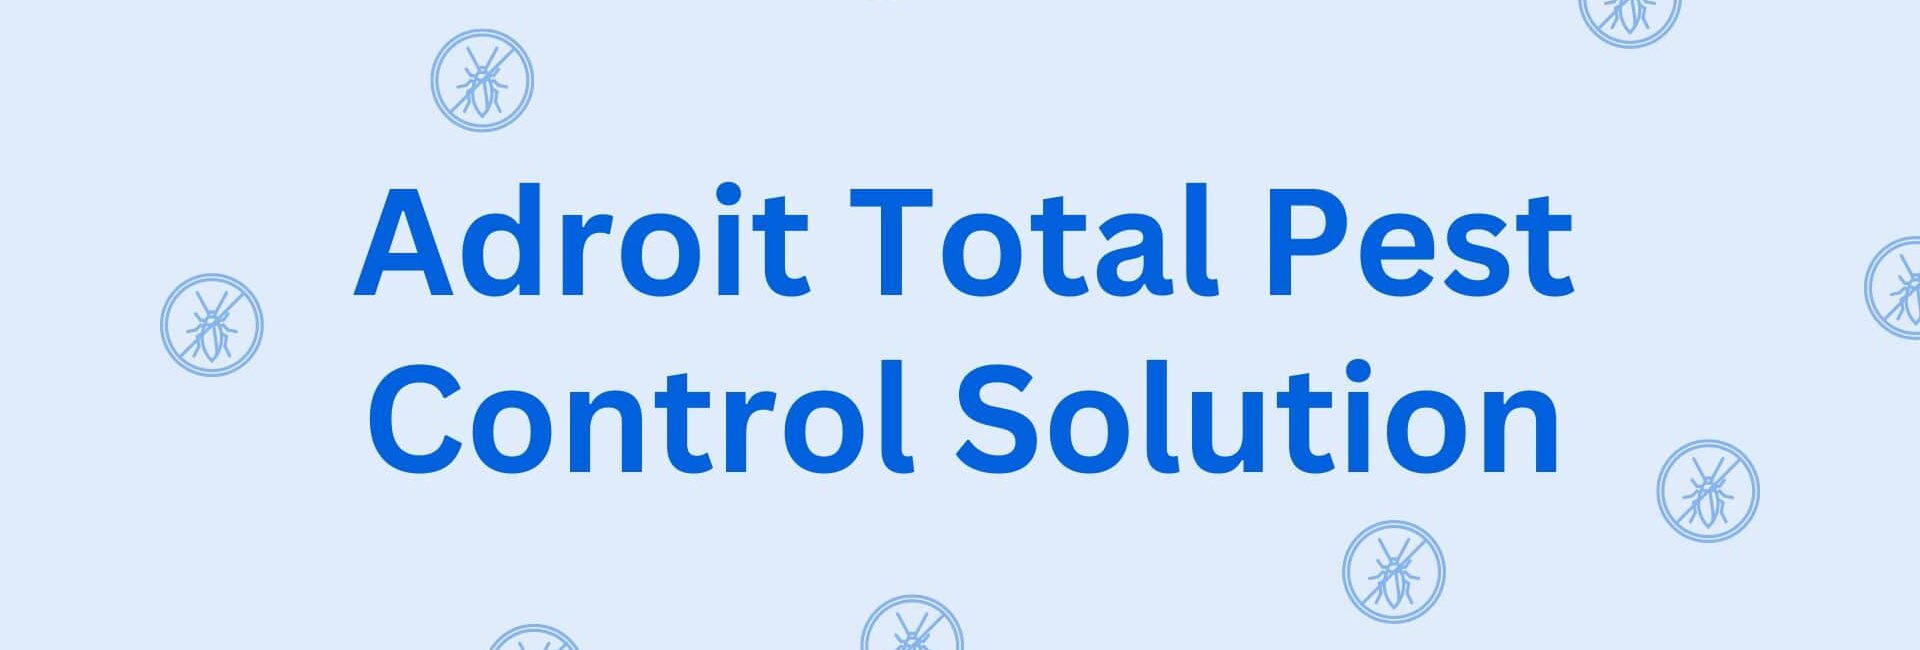 Adroit Total Pest Control Solution - Pest Control Service in Hisar